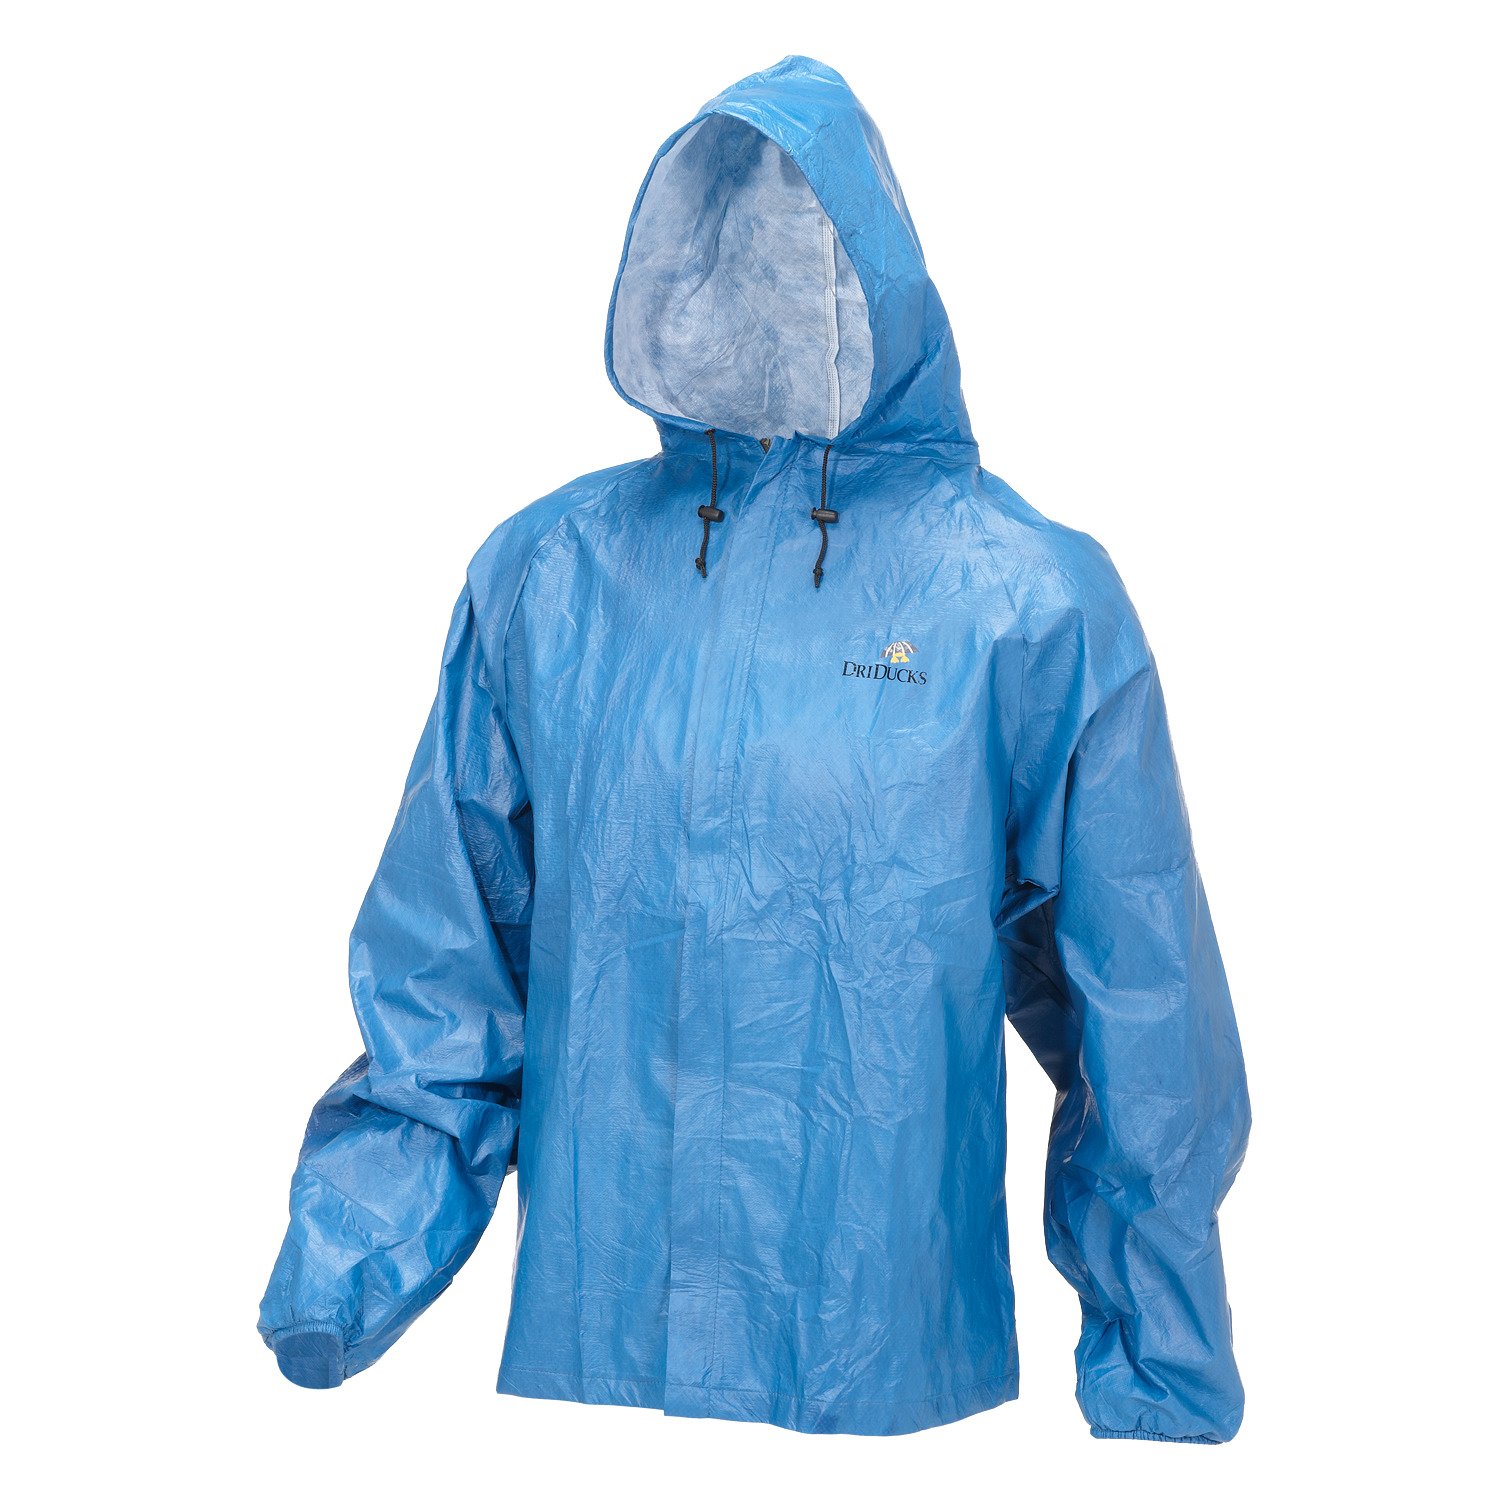 Frogg Toggs Adults Ultra Lite Rain Suit